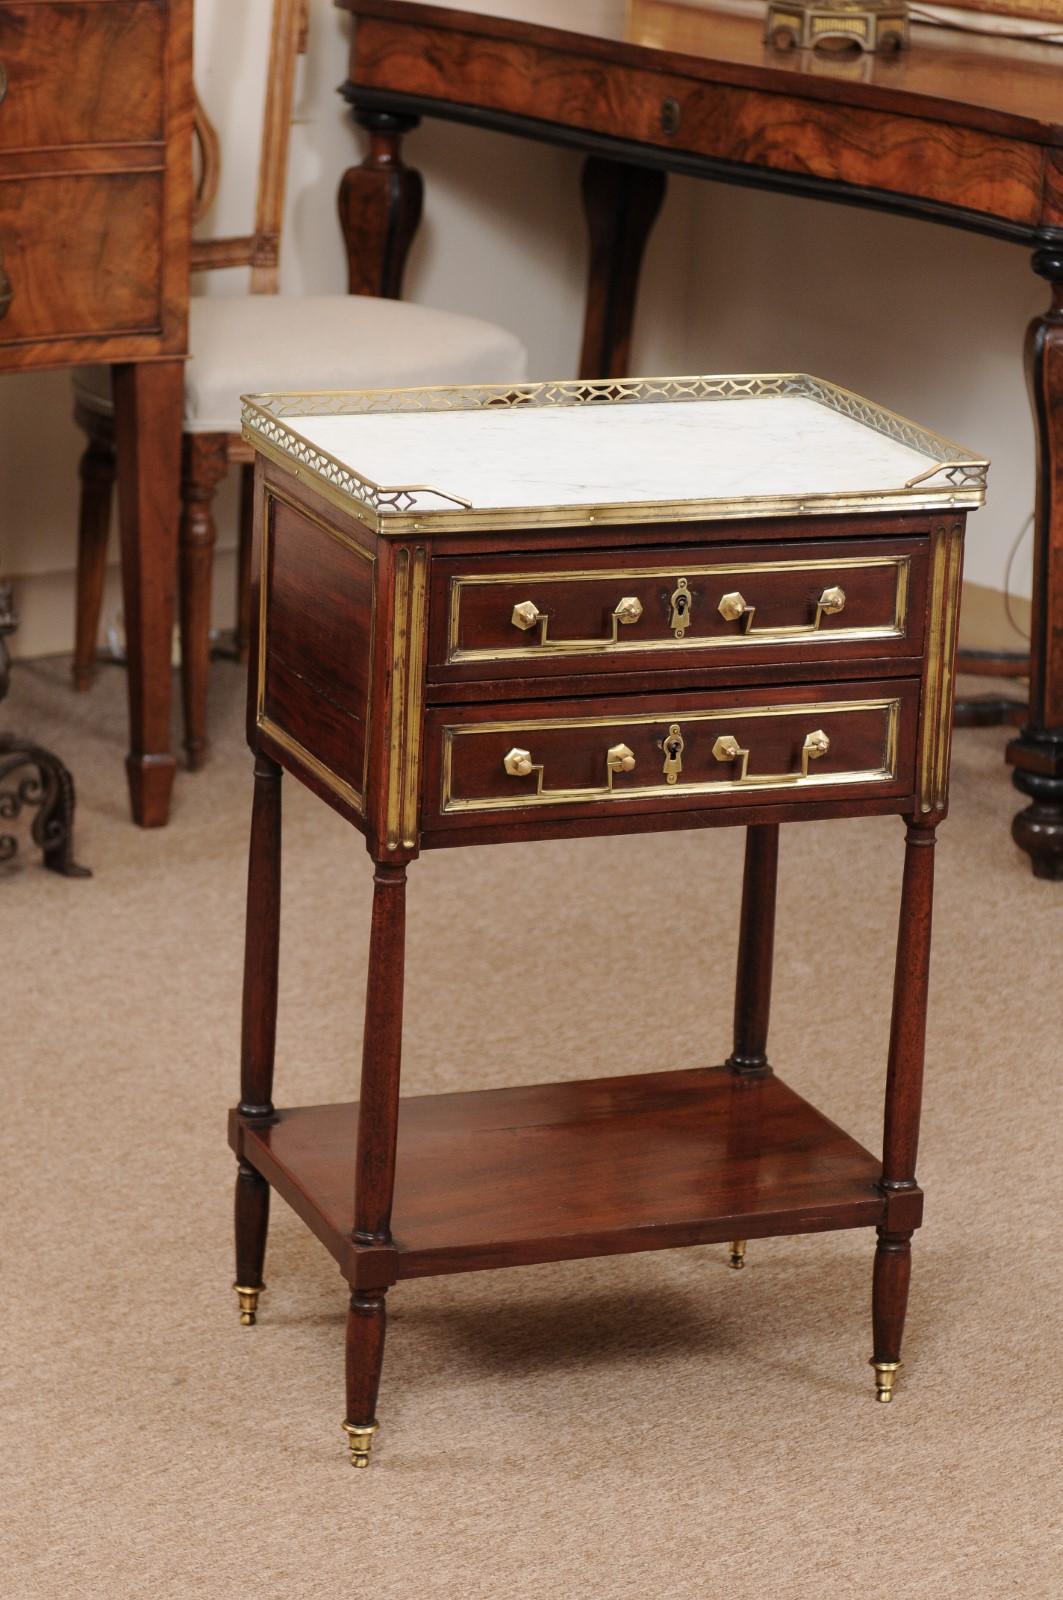 Louis XVI Walnut Chevet with 2 drawers, lower shelf, and white marble top with Brass Gallery, France.